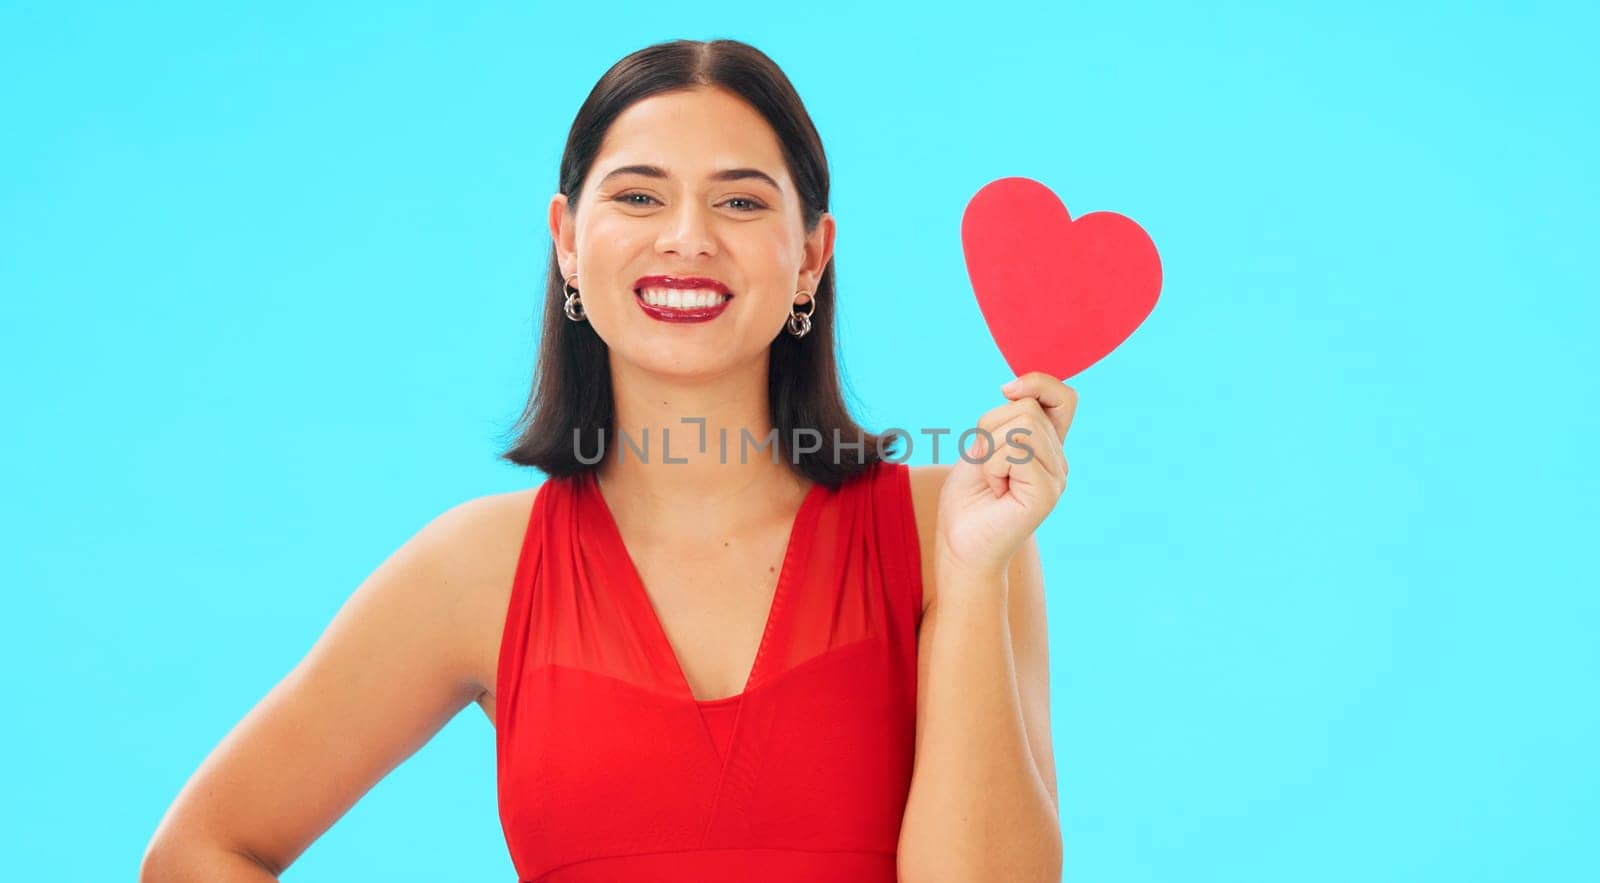 Paper heart, happy woman and face on blue background, studio and backdrop. Portrait of female model in red dress with shape of love, trust and romance for valentines day, flirting and elegant smile.